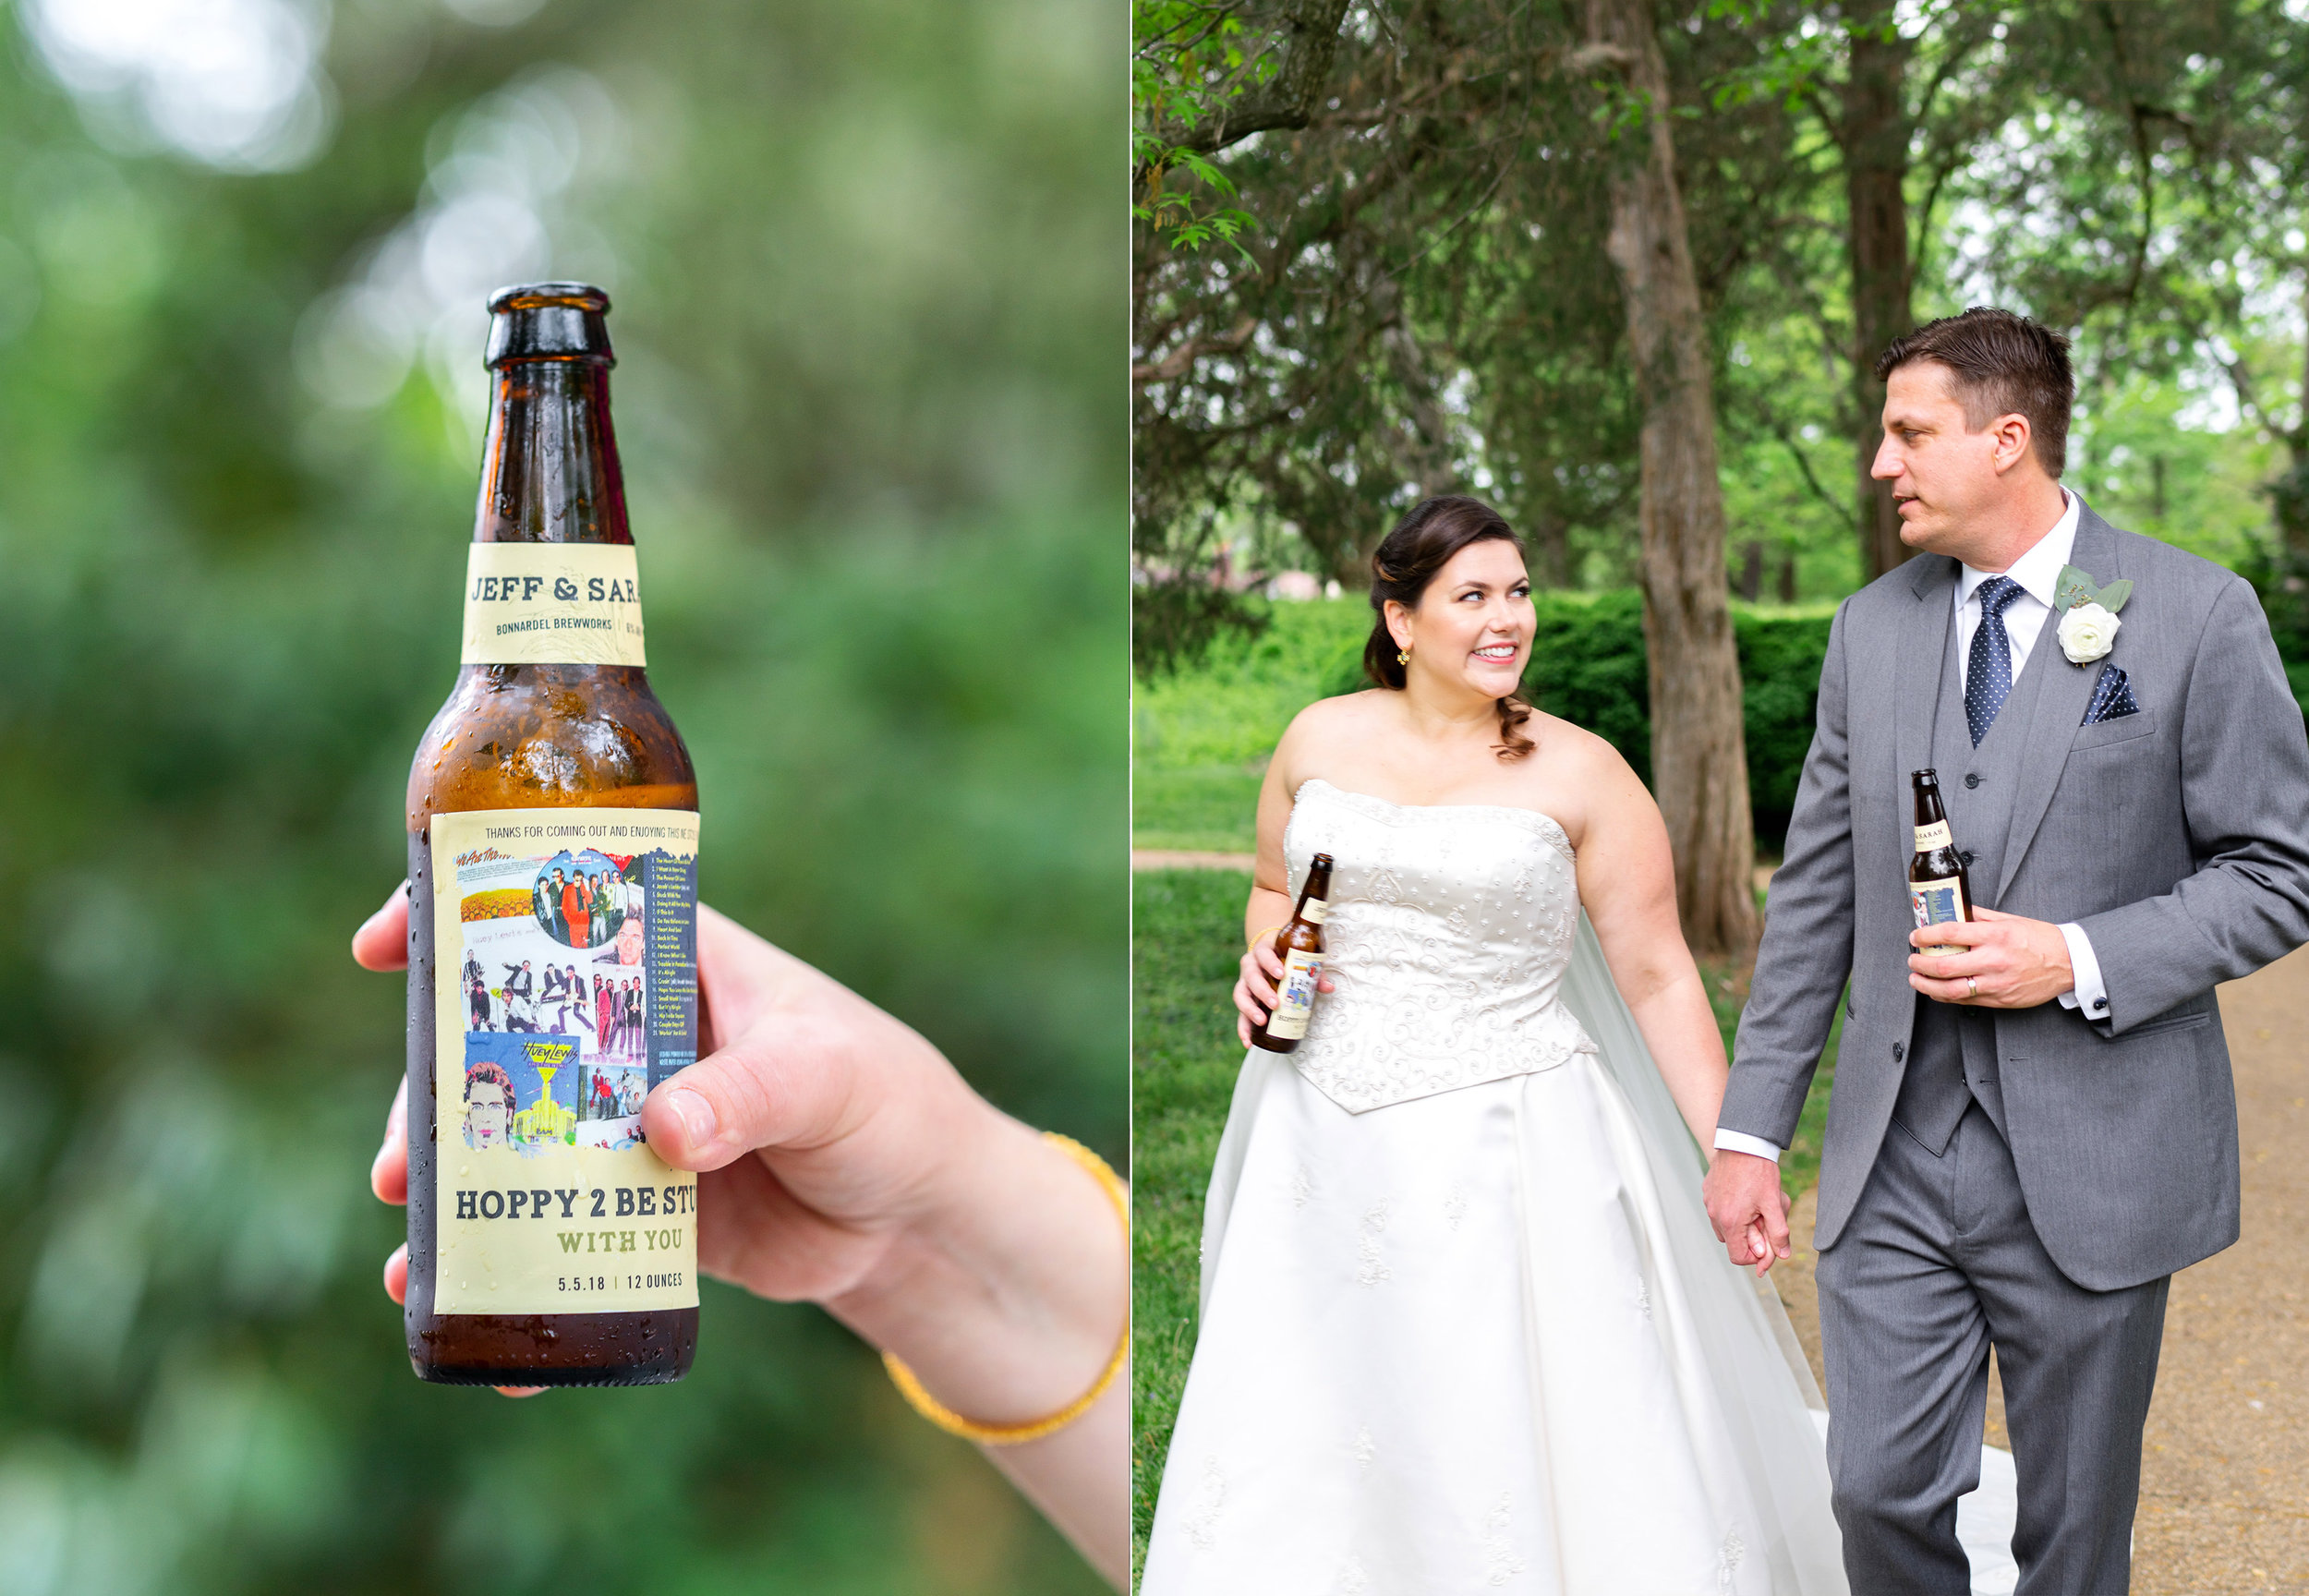 Custom beer bottle label for wedding at Hendry House (left) and bride and groom (right)